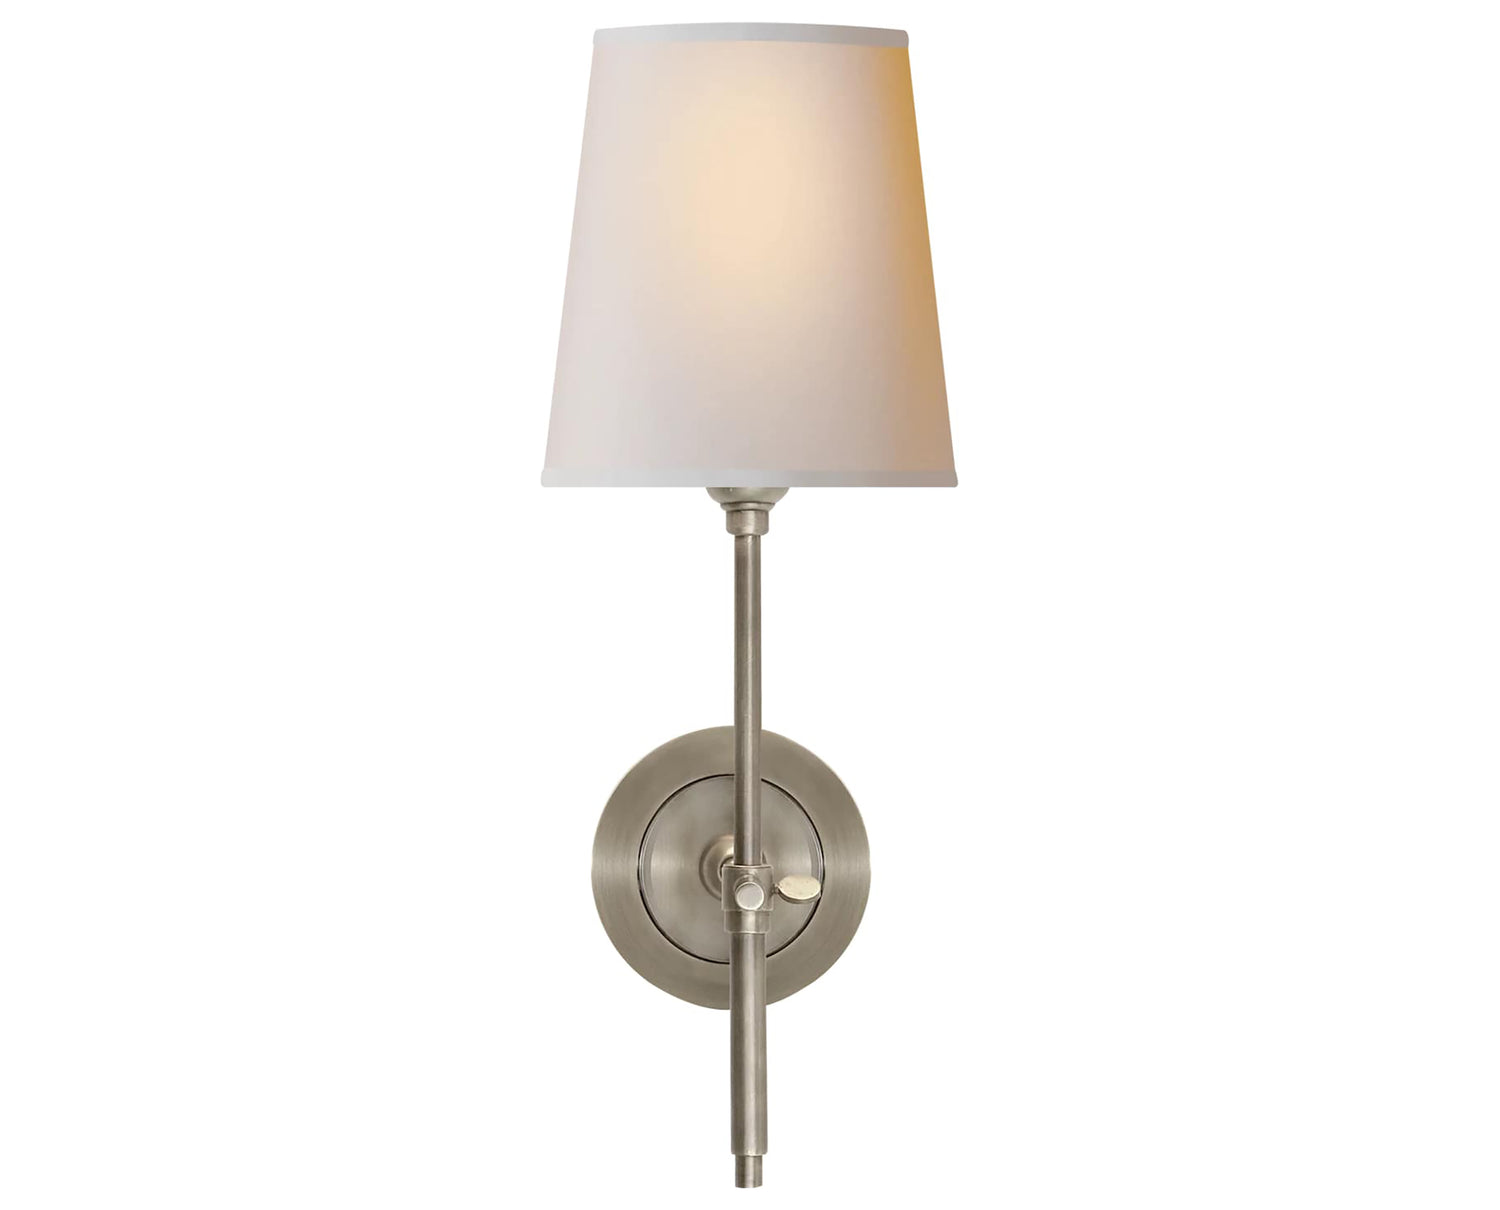 Antique Nickel & Natural Paper | Bryant Sconce - Natural Paper Shade | Valley Ridge Furniture